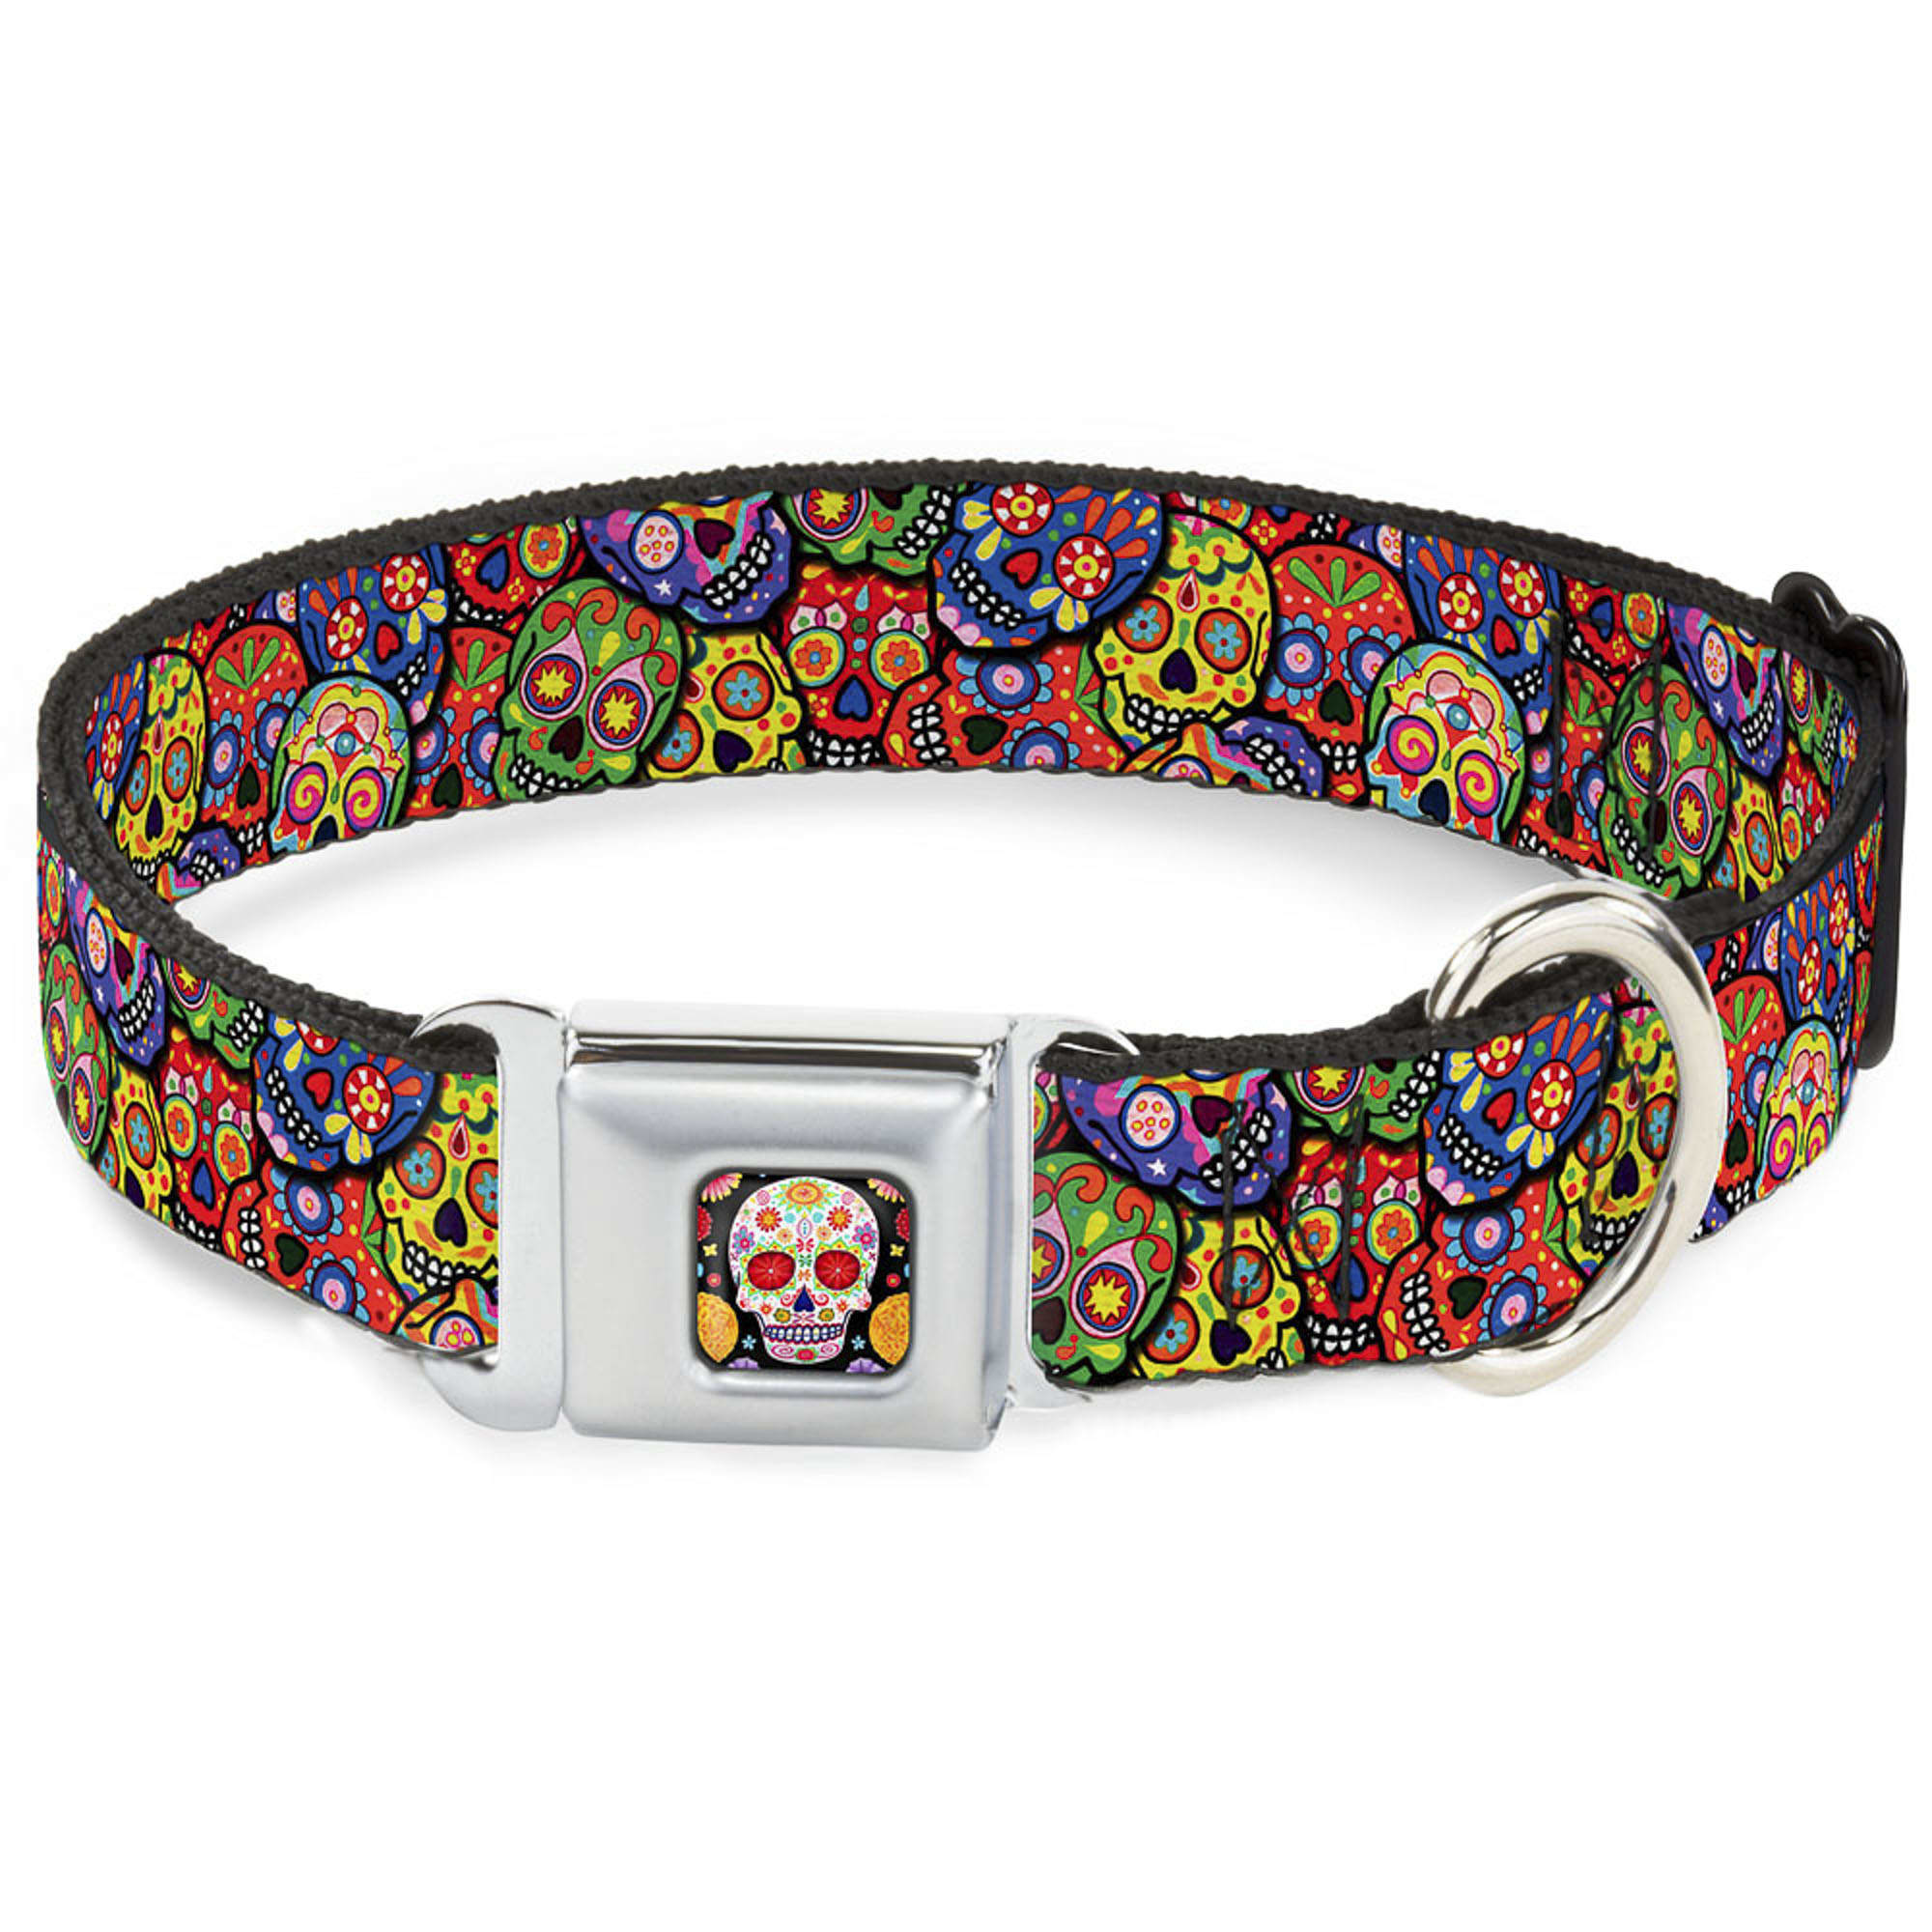 Buckle-Down Dog Collar Plastic Clip Sugar Skulls Gray Pink Available in Adjustable Sizes for Small Medium Large Dogs 